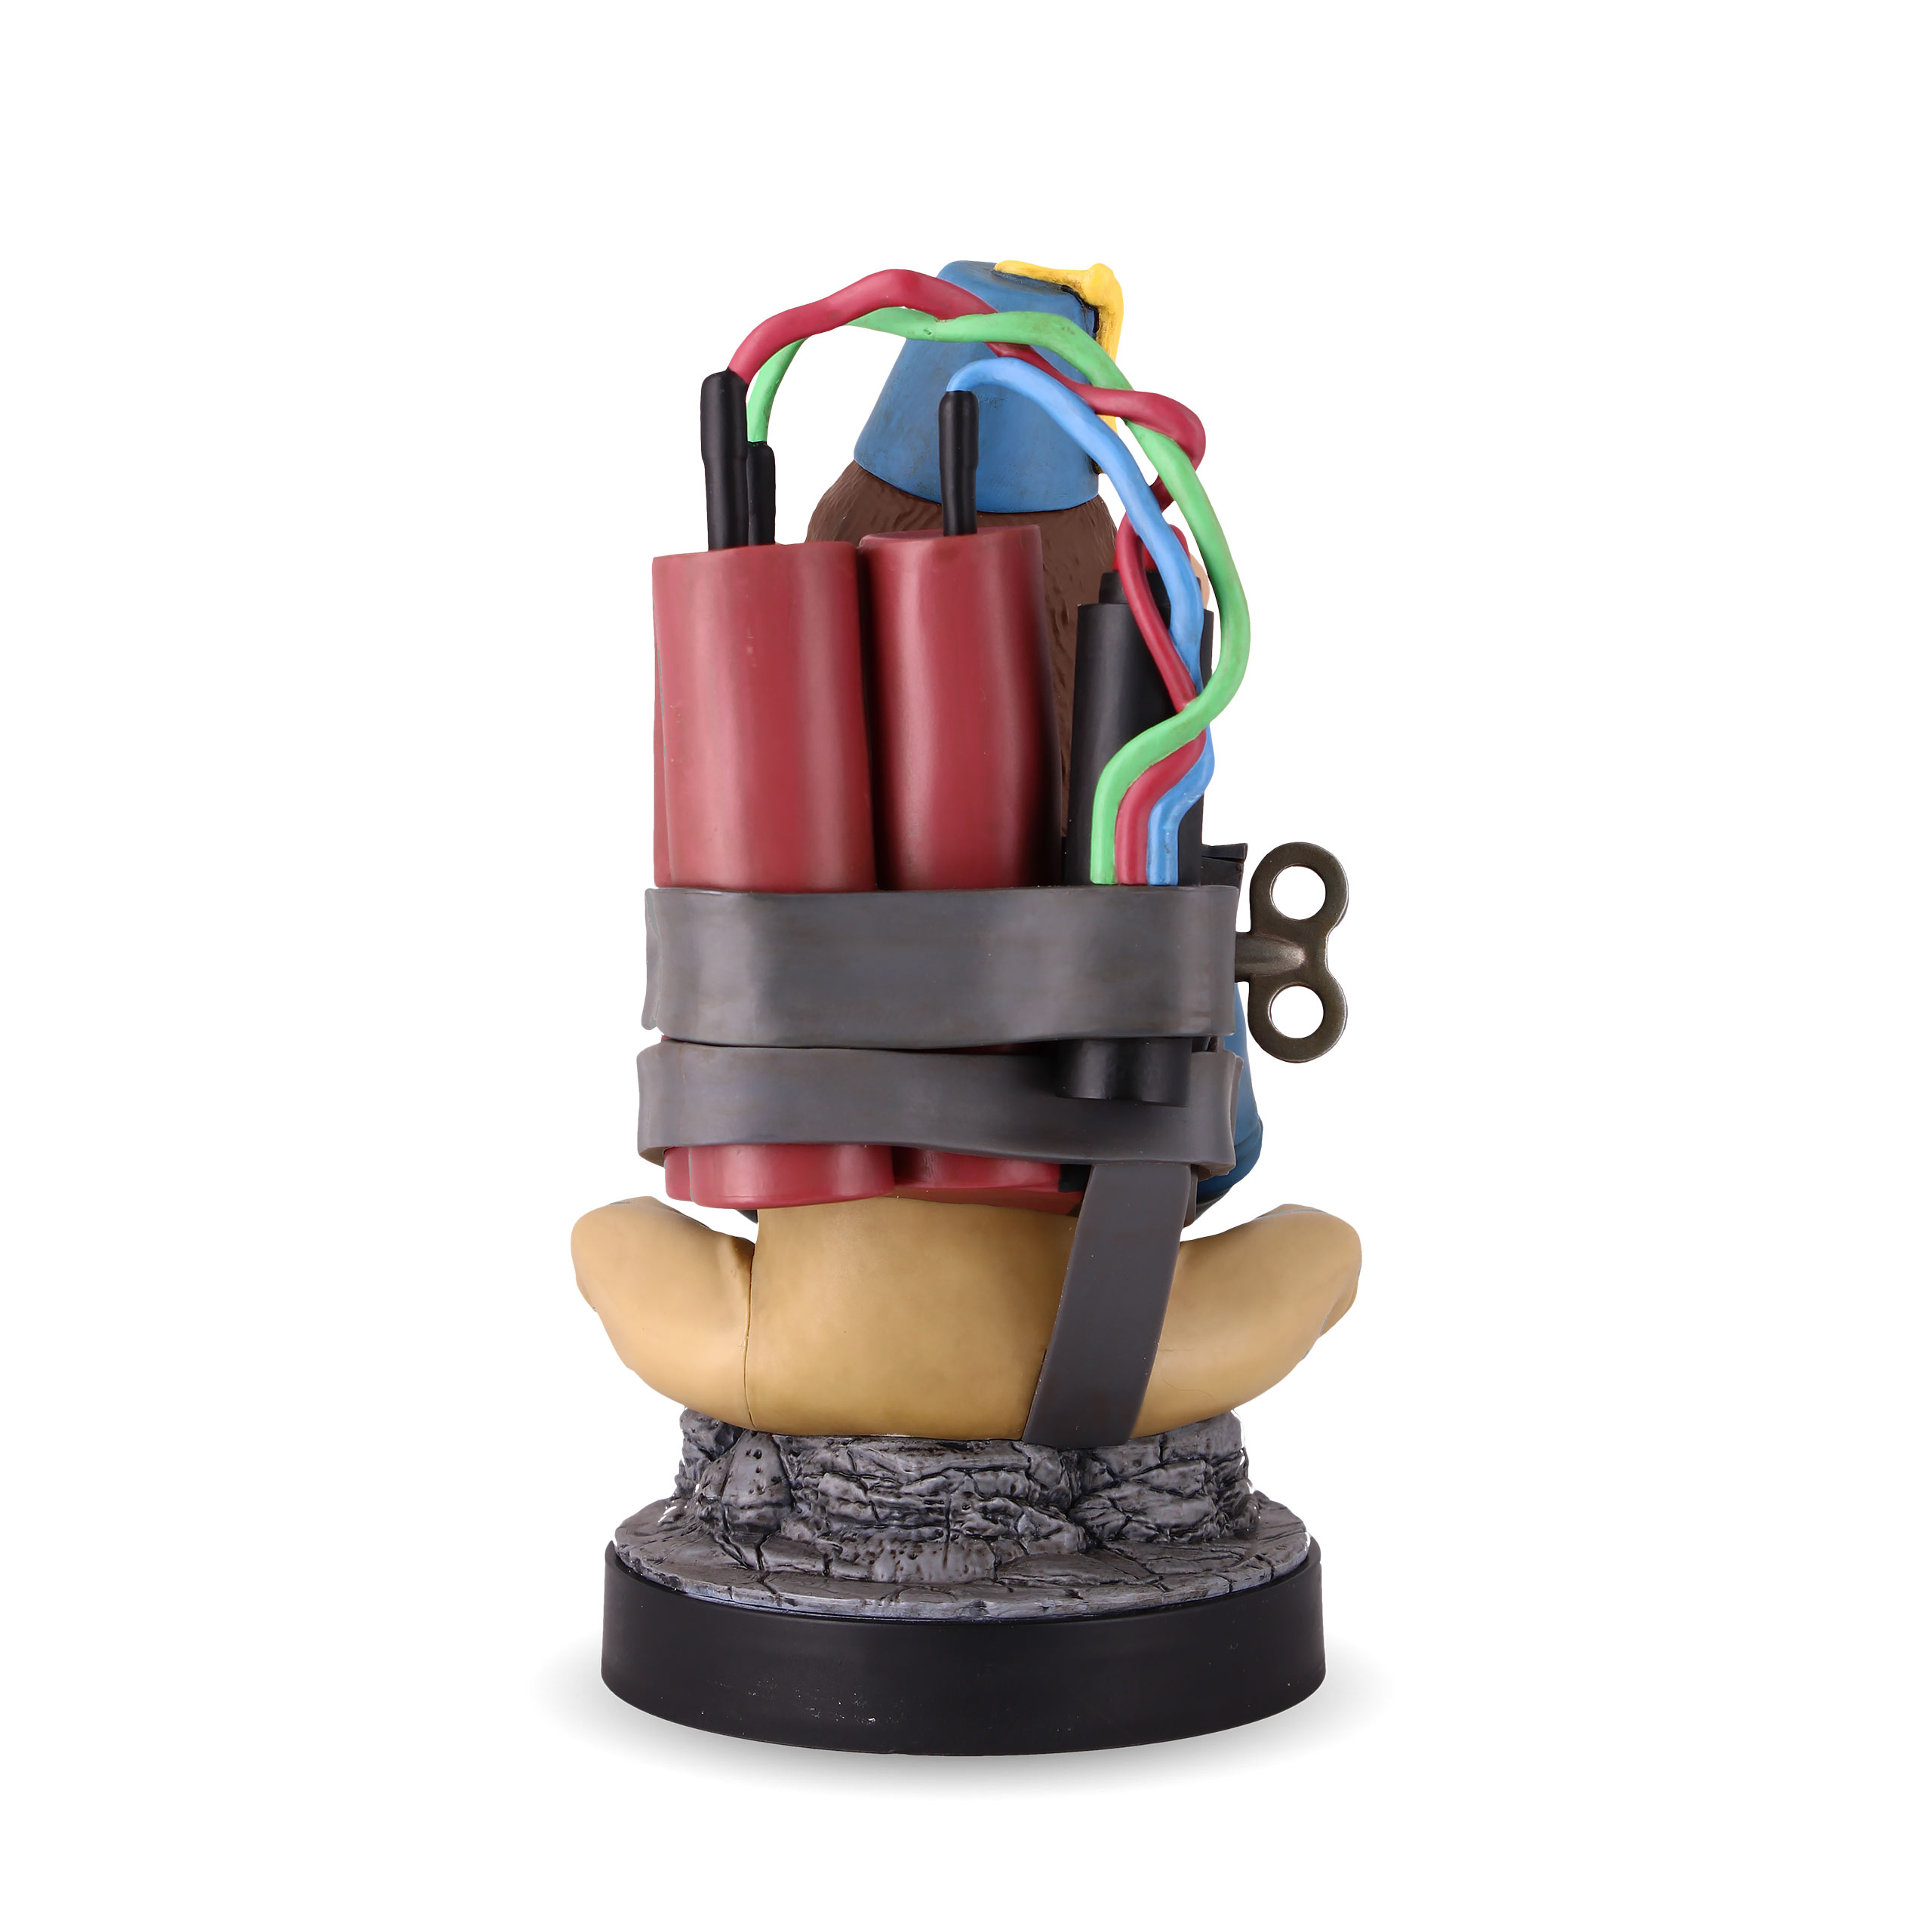 Call of Duty - Monkey Bomb Cable Guy Figure